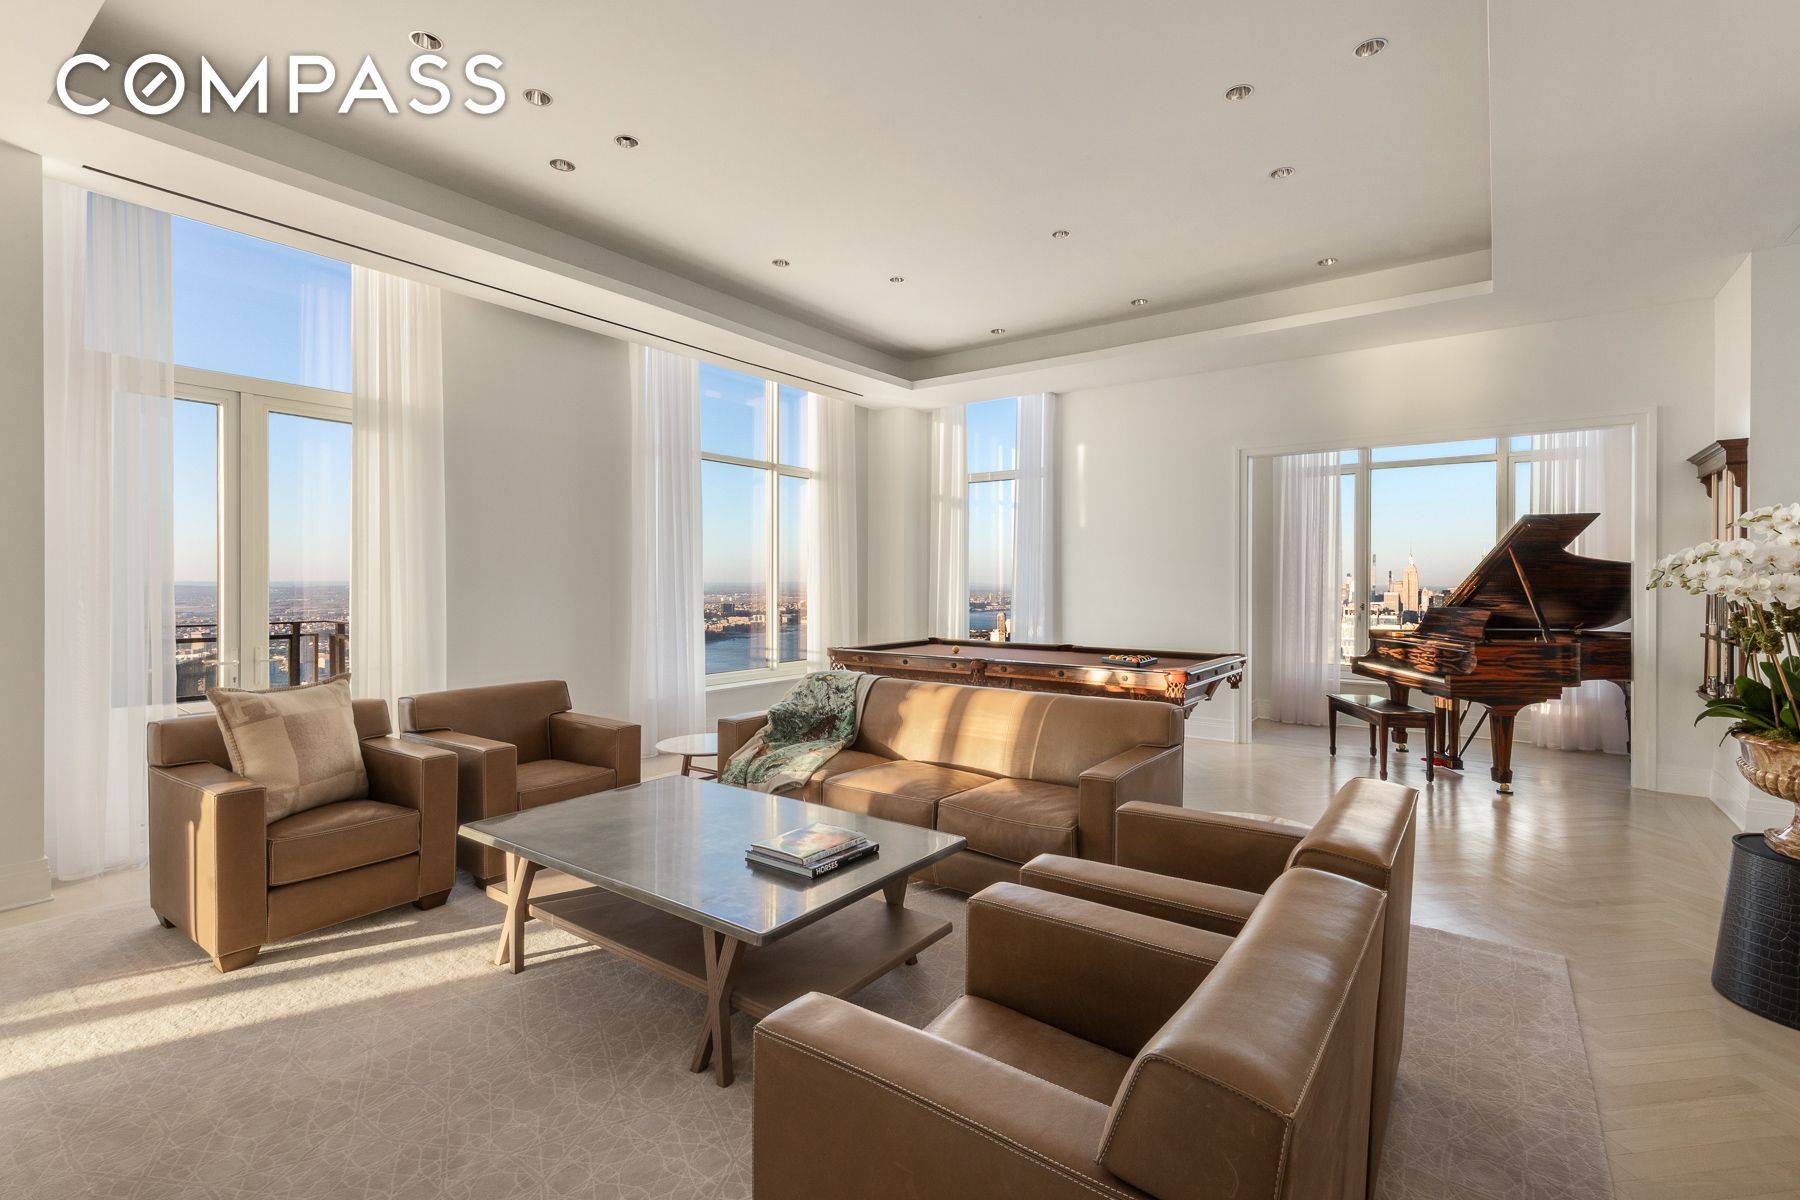 The most substantive real estate in the world is the kind that is difficult to impossible to replicate this pristine, private, full floor penthouse soaring atop Tribeca's limestone clad, Robert ...